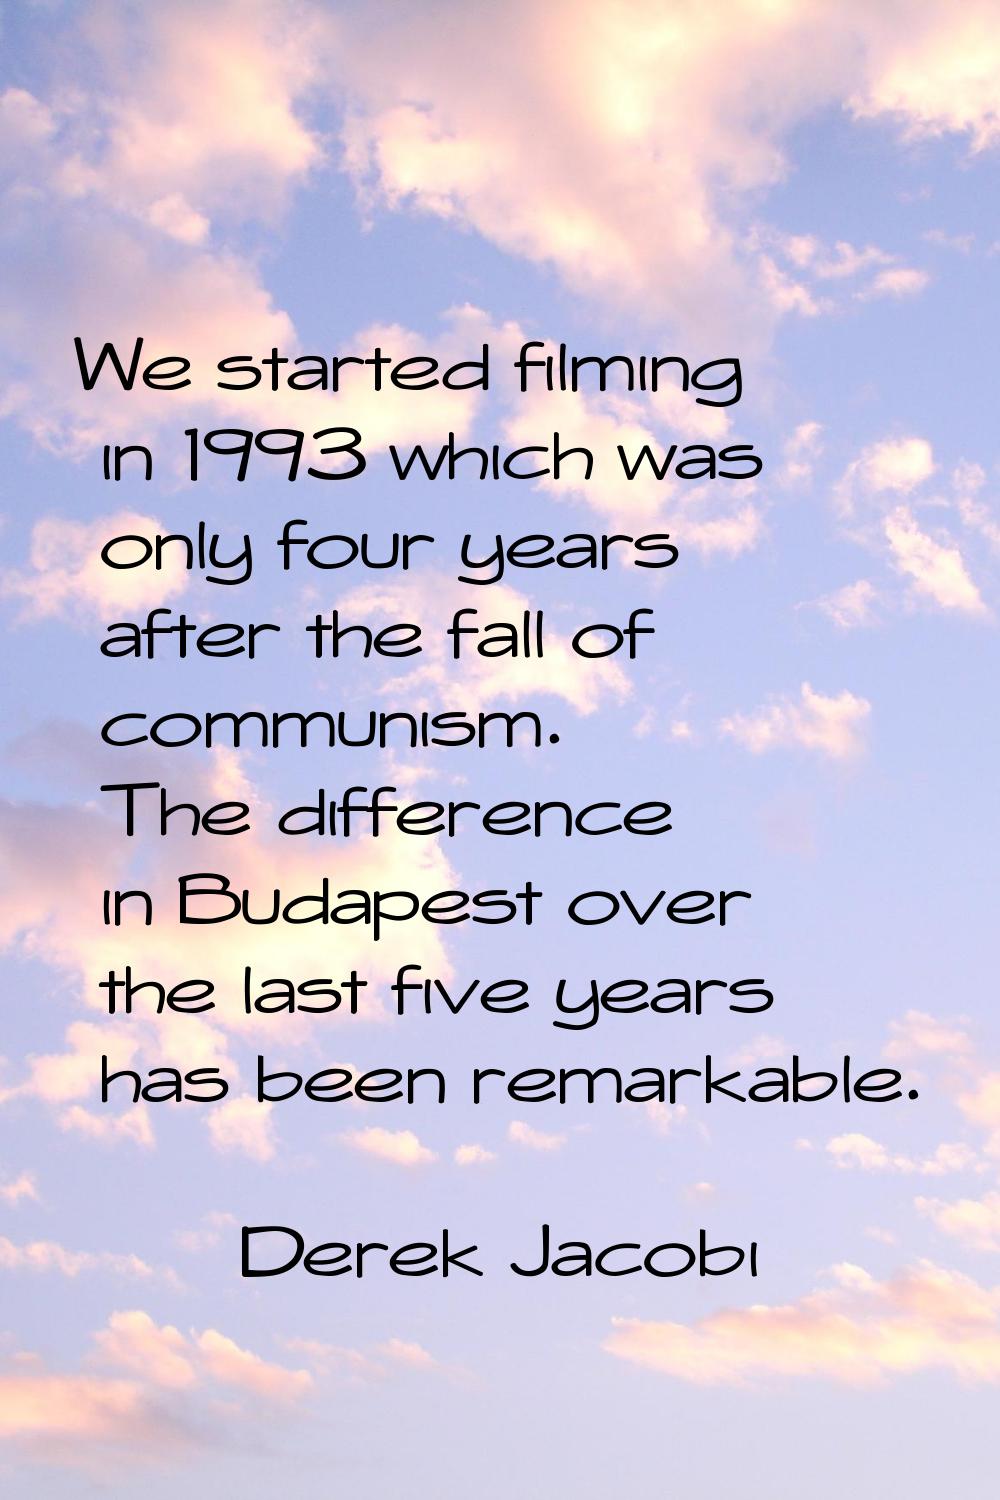 We started filming in 1993 which was only four years after the fall of communism. The difference in